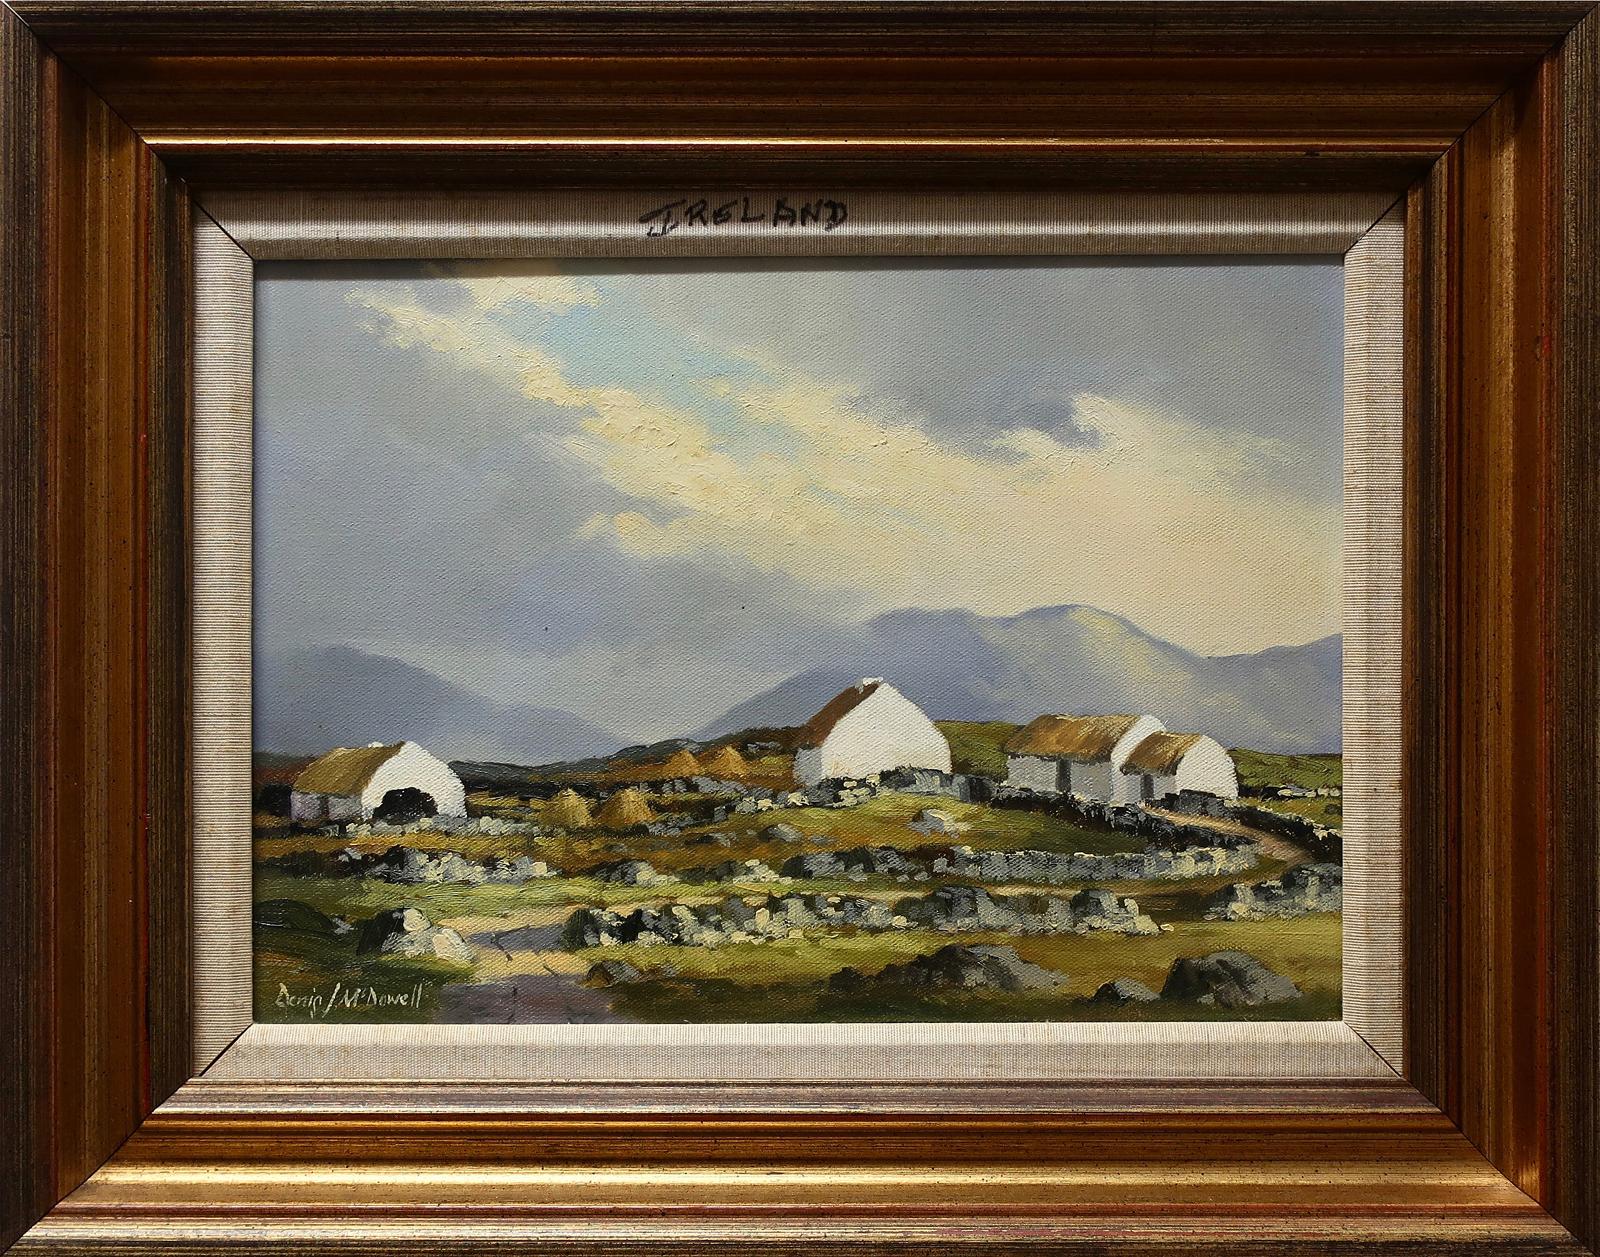 Denis J. Mcdowell (1930-1991) - At Ballyconnelly, Connemarr